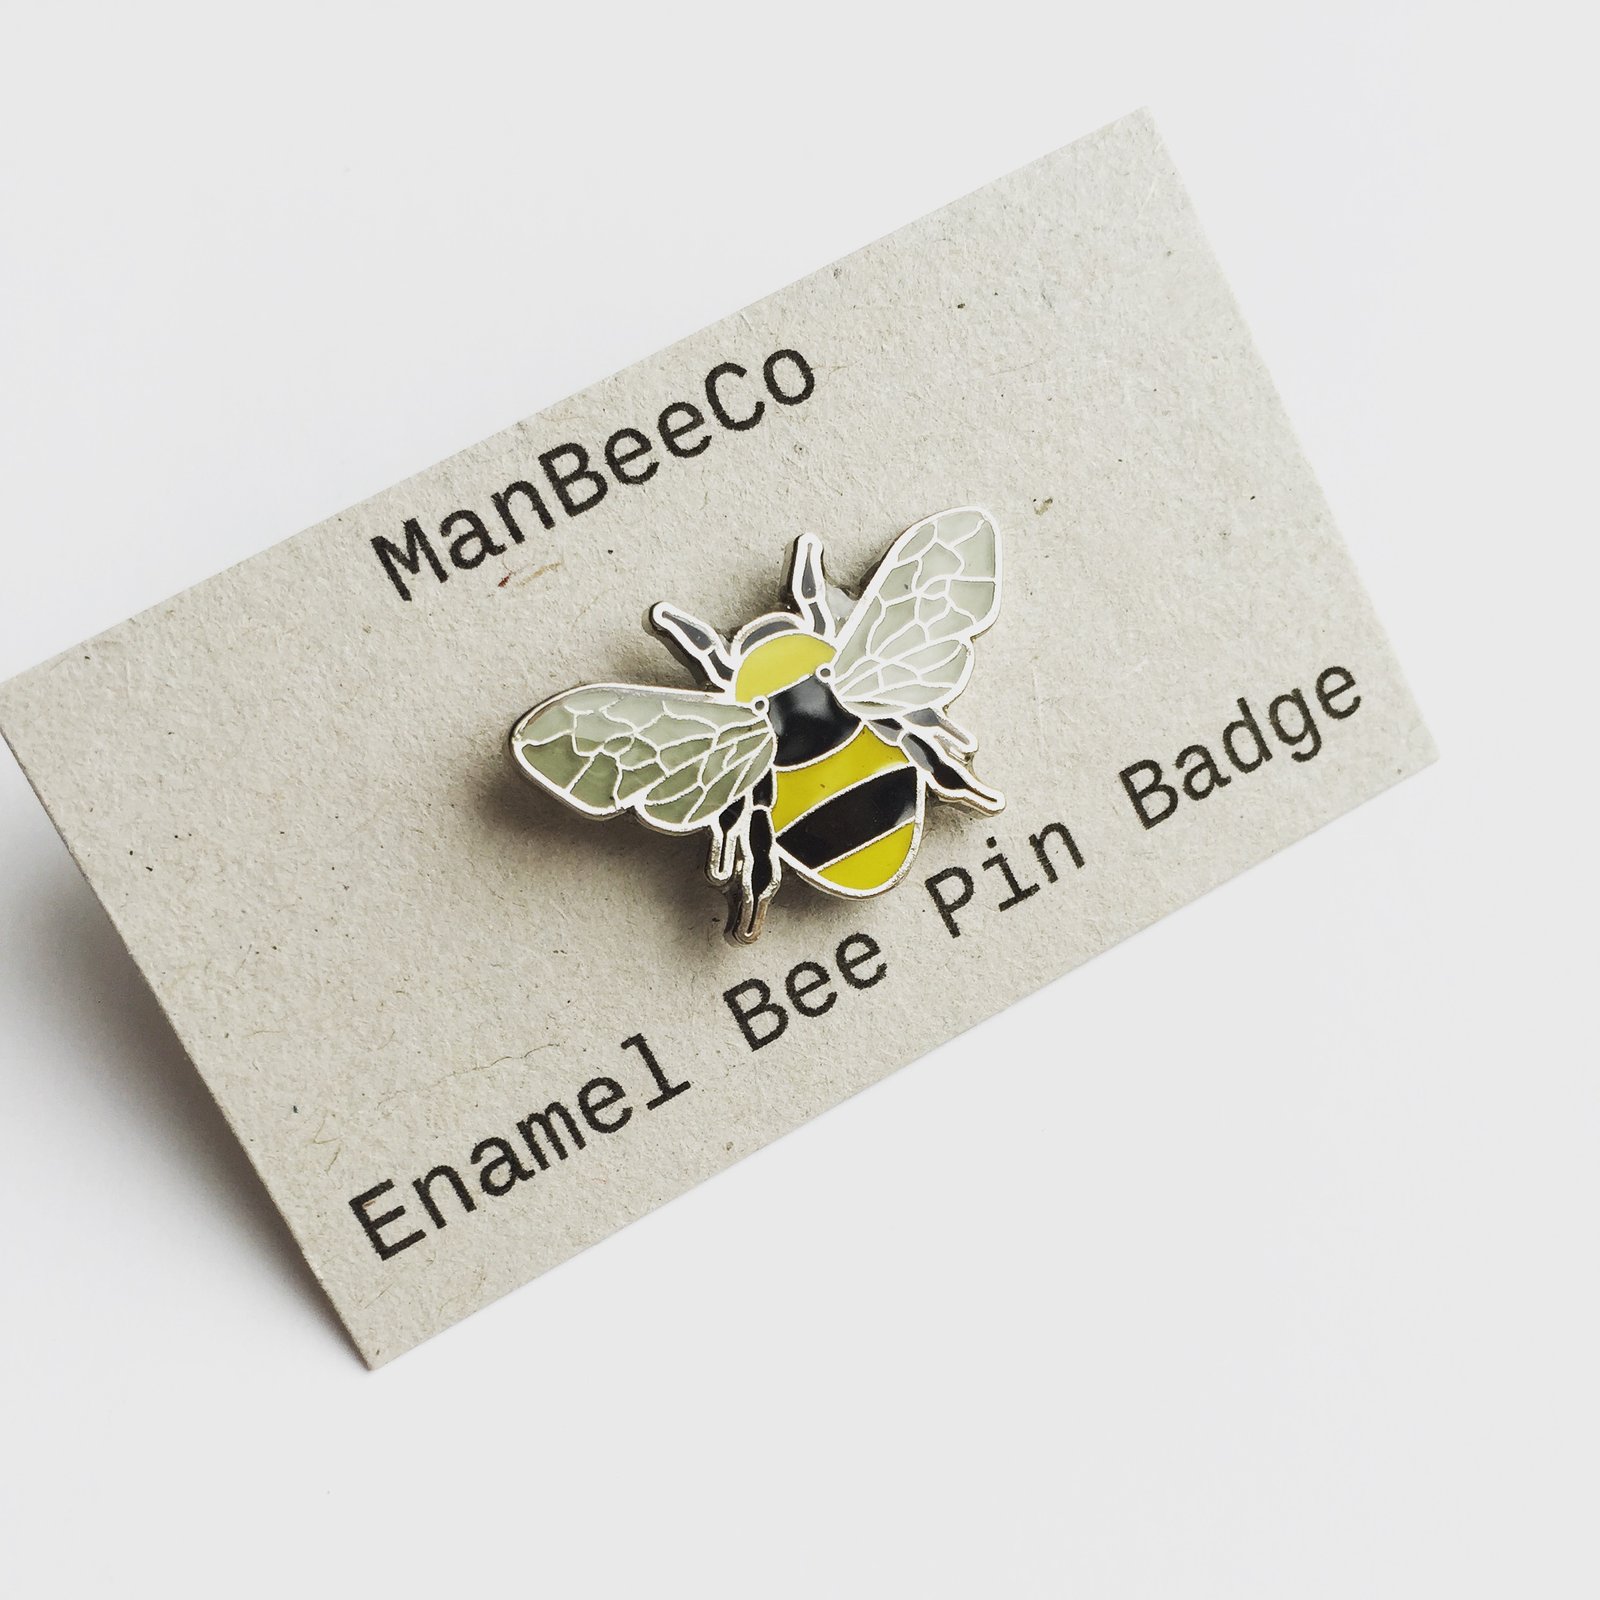 GOOD TO BEE HOME print a4 Art Photo #001 MANCHESTER BEE